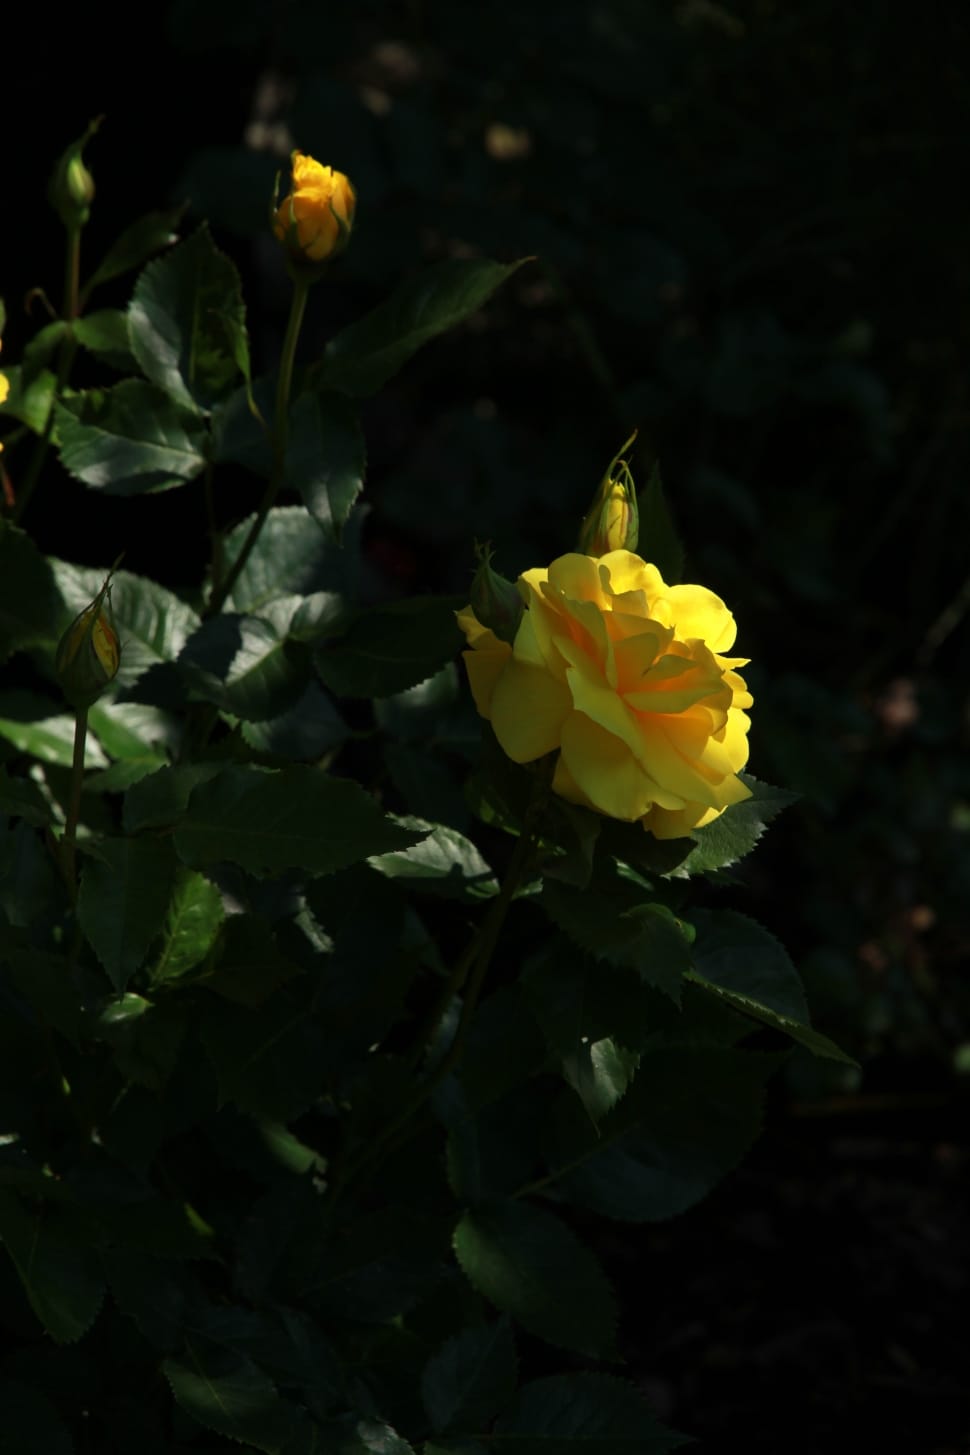 yellow petaled flower preview